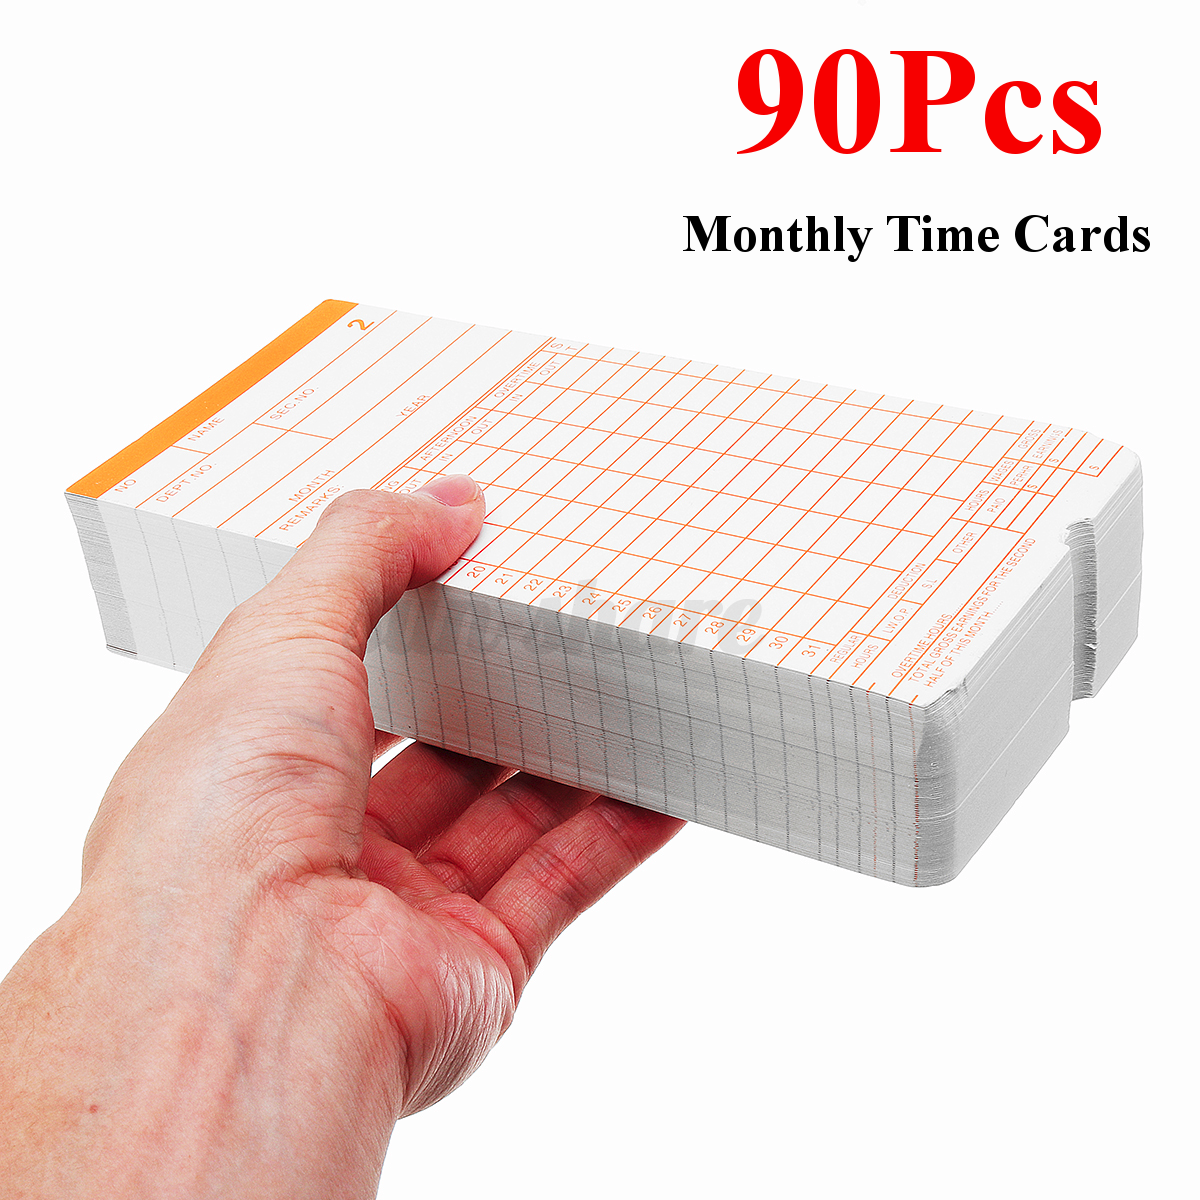 90 PCS Monthly Time Clock Cards Recorder For OFFicial shop Attendance half Payroll